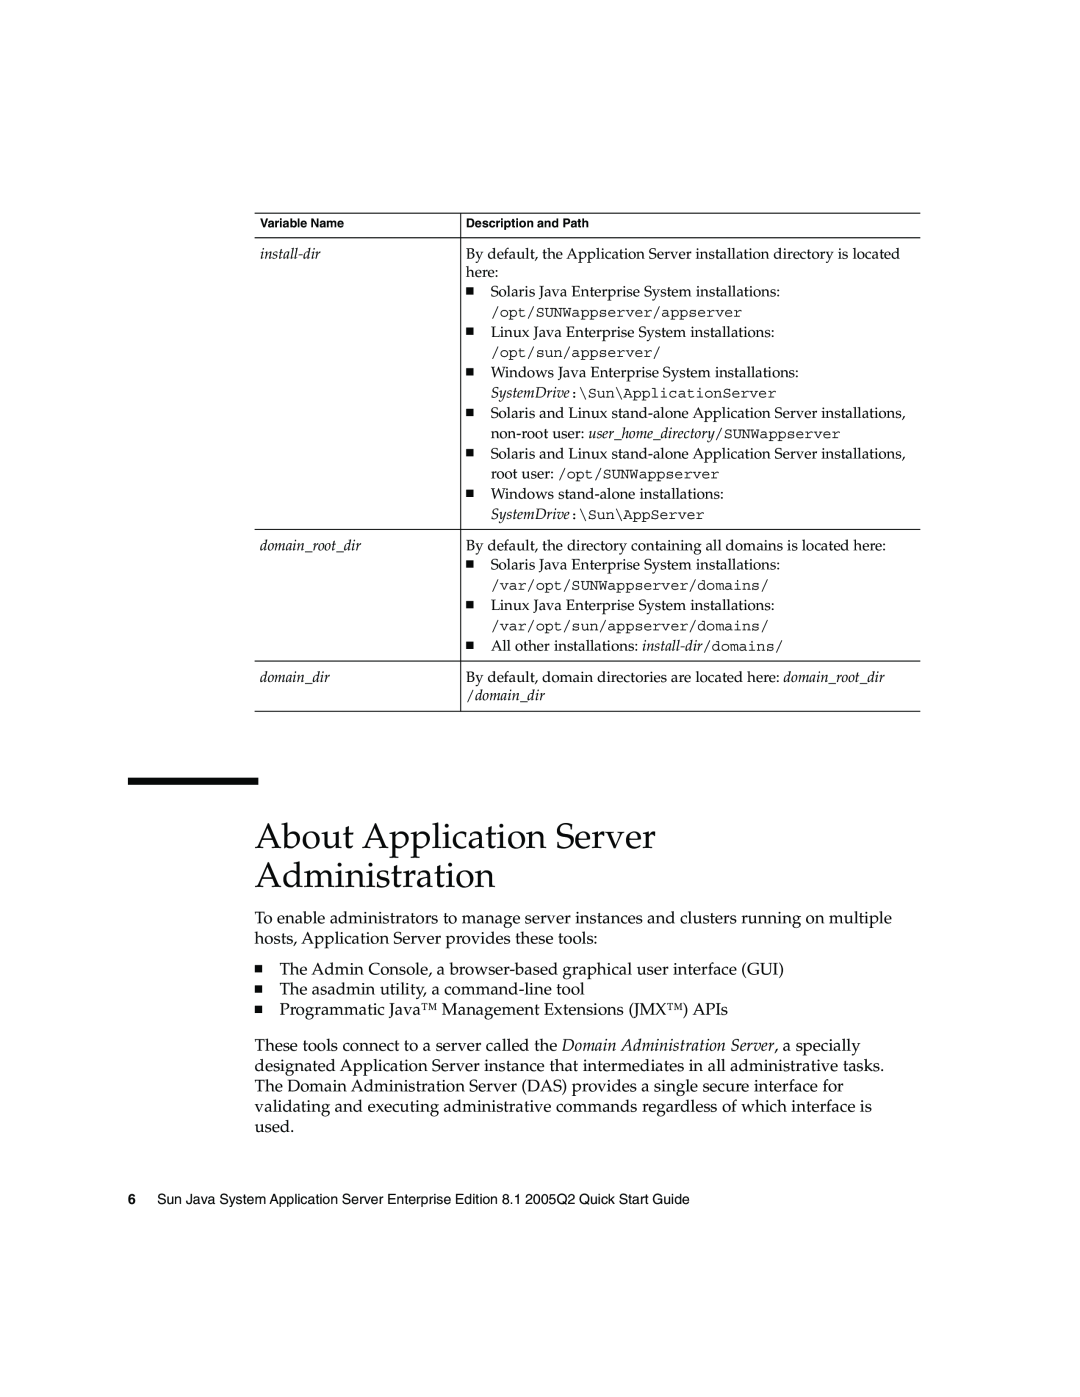 Sun Microsystems 2005Q2 quick start About Application Server Administration 